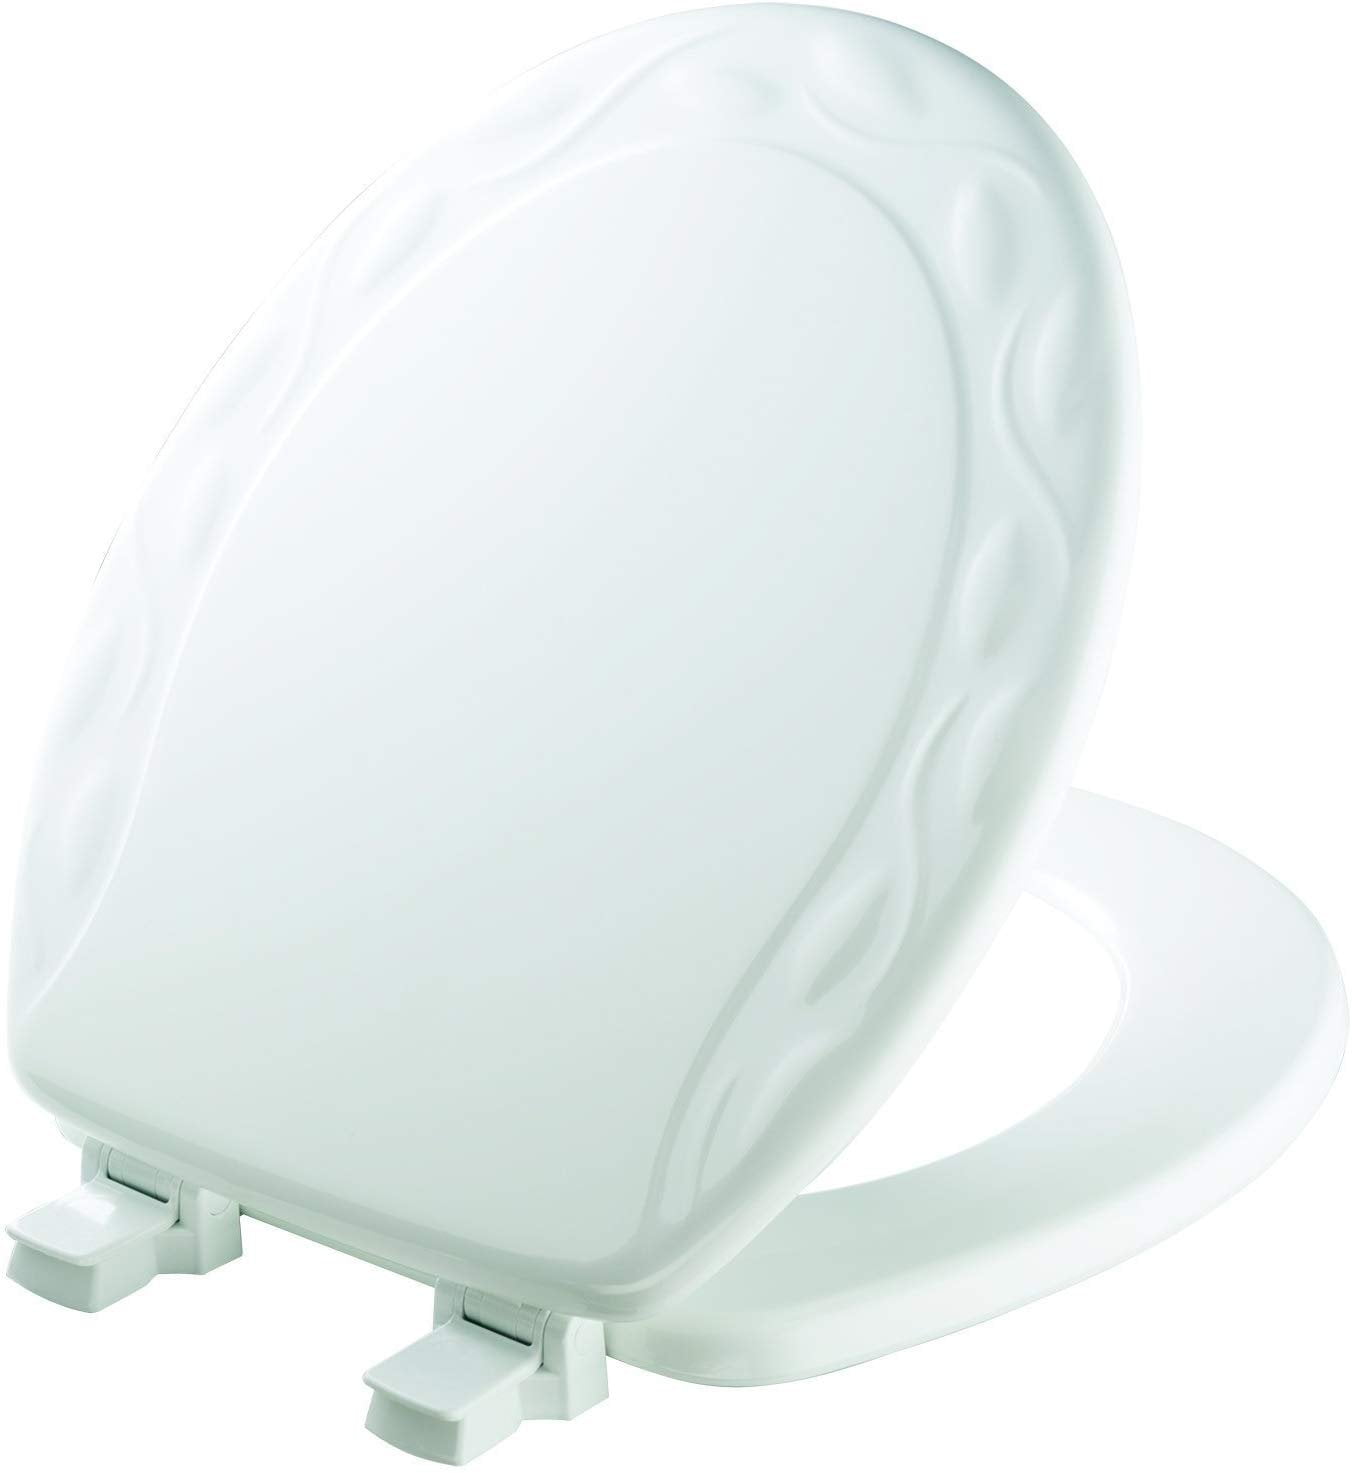 ELONGATED Long Lasting MAYFAIR Toilet Seat Will Never Loosen And Easily Remove 